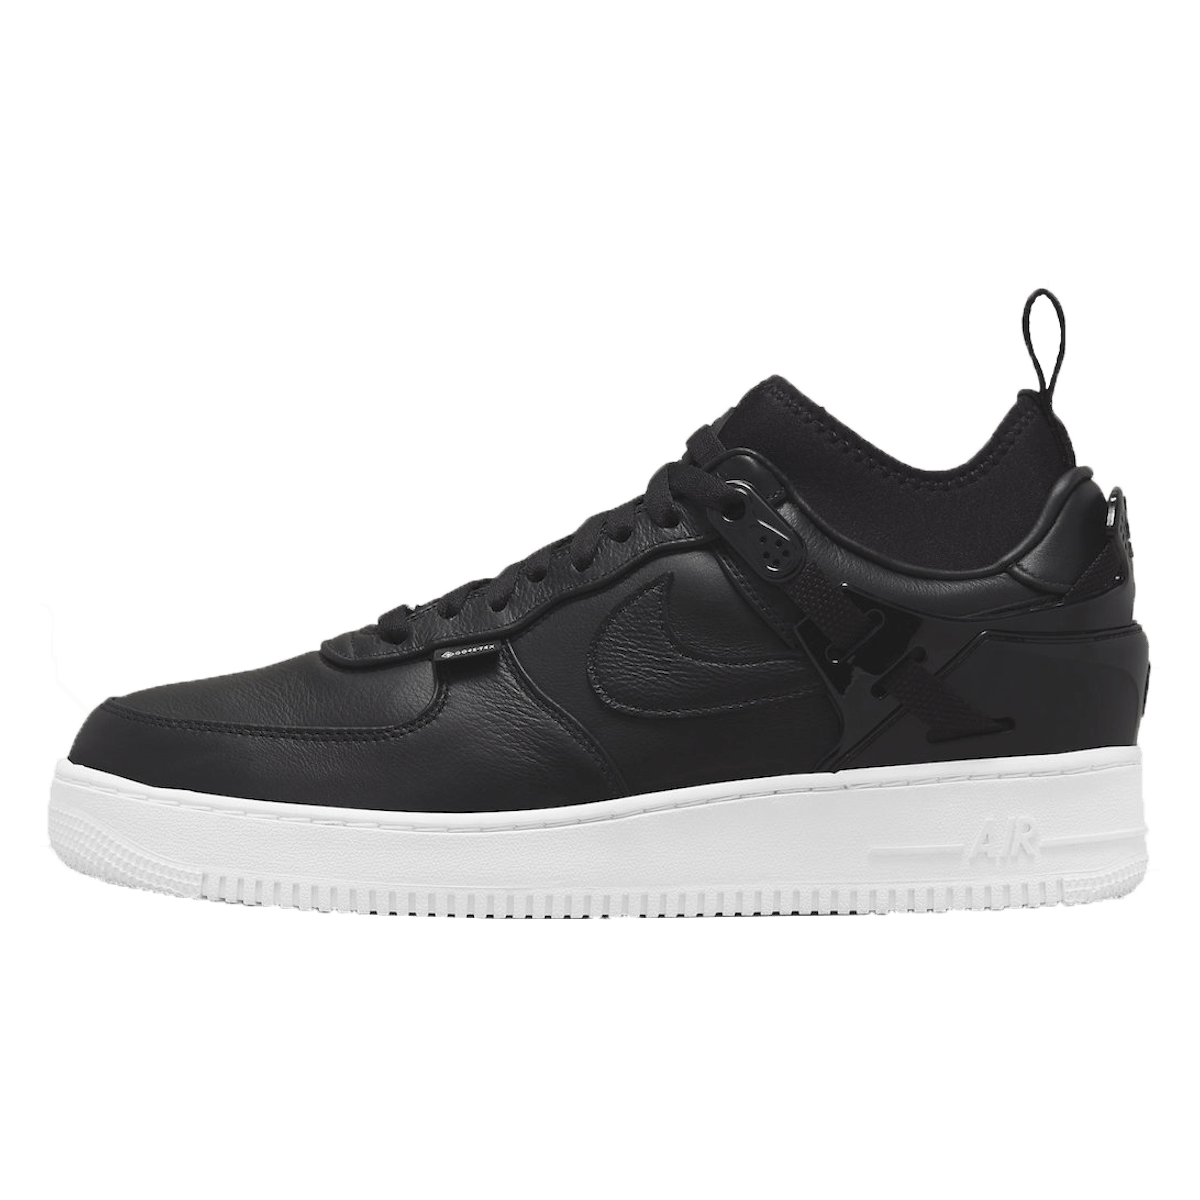 UNDERCOVER x Nike Air Force 1 Low SP "Black"